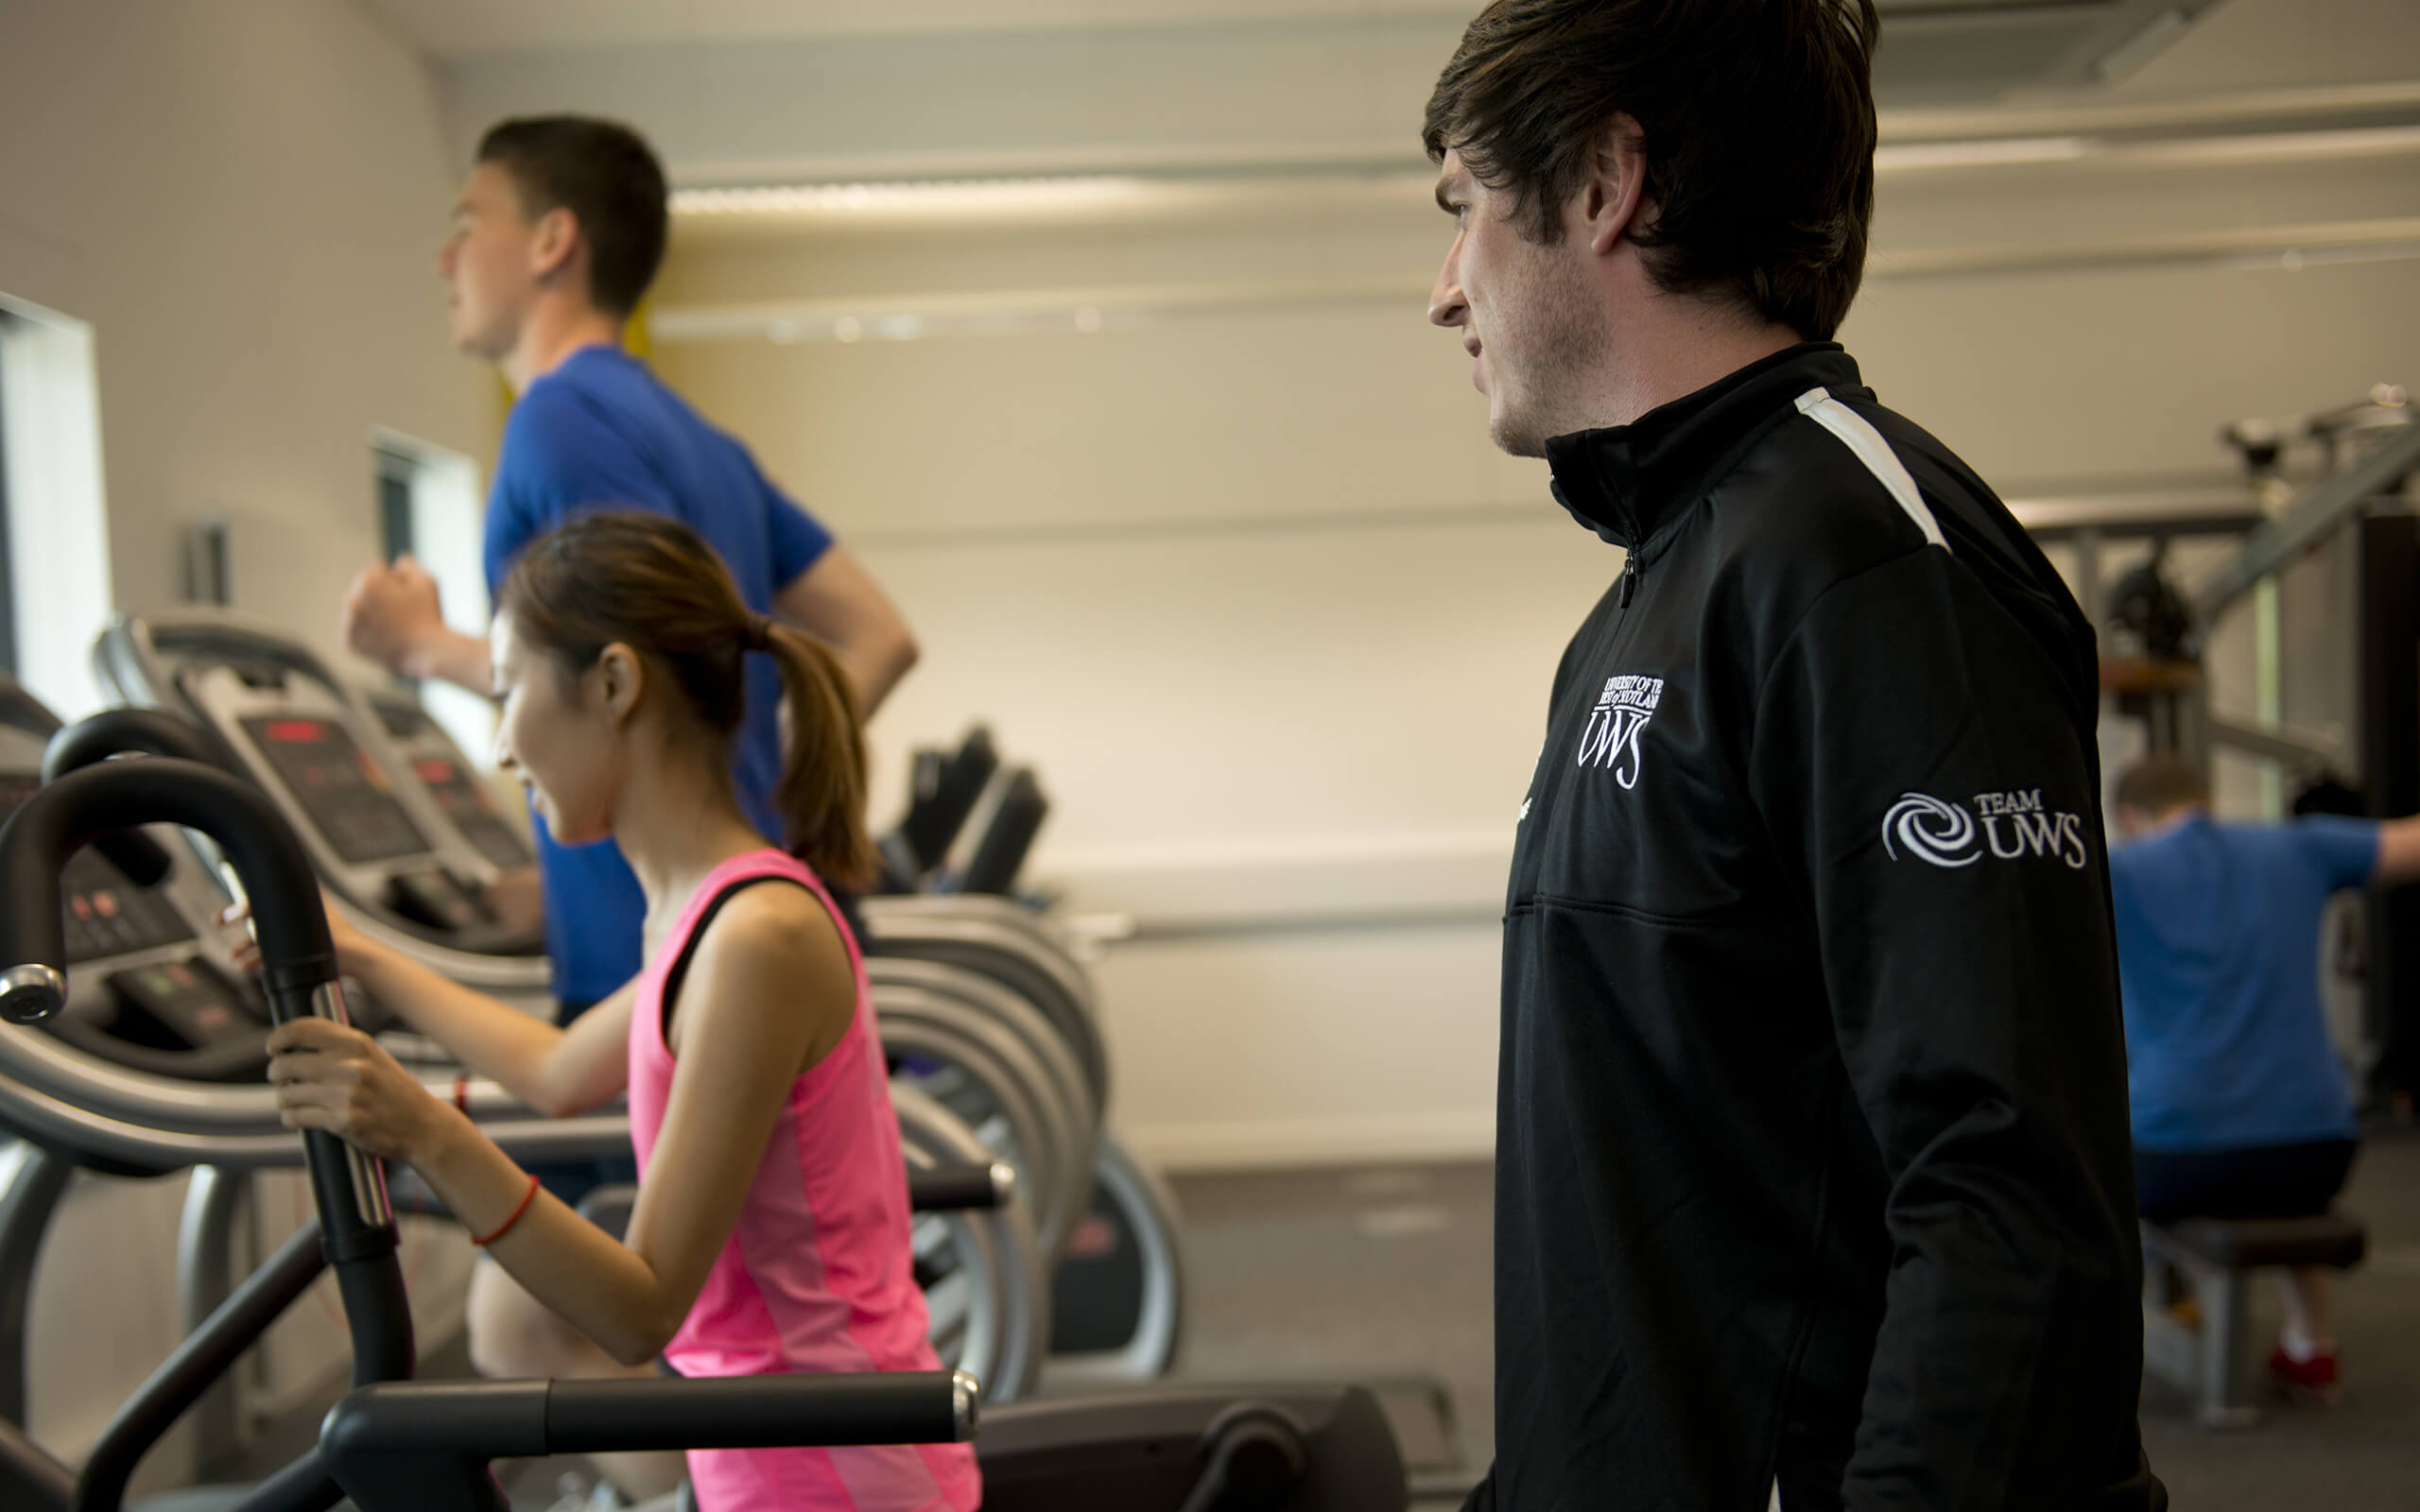 UWS Student & Trainer at Sports Gym in Ayr Campus | University of the West of Scotland